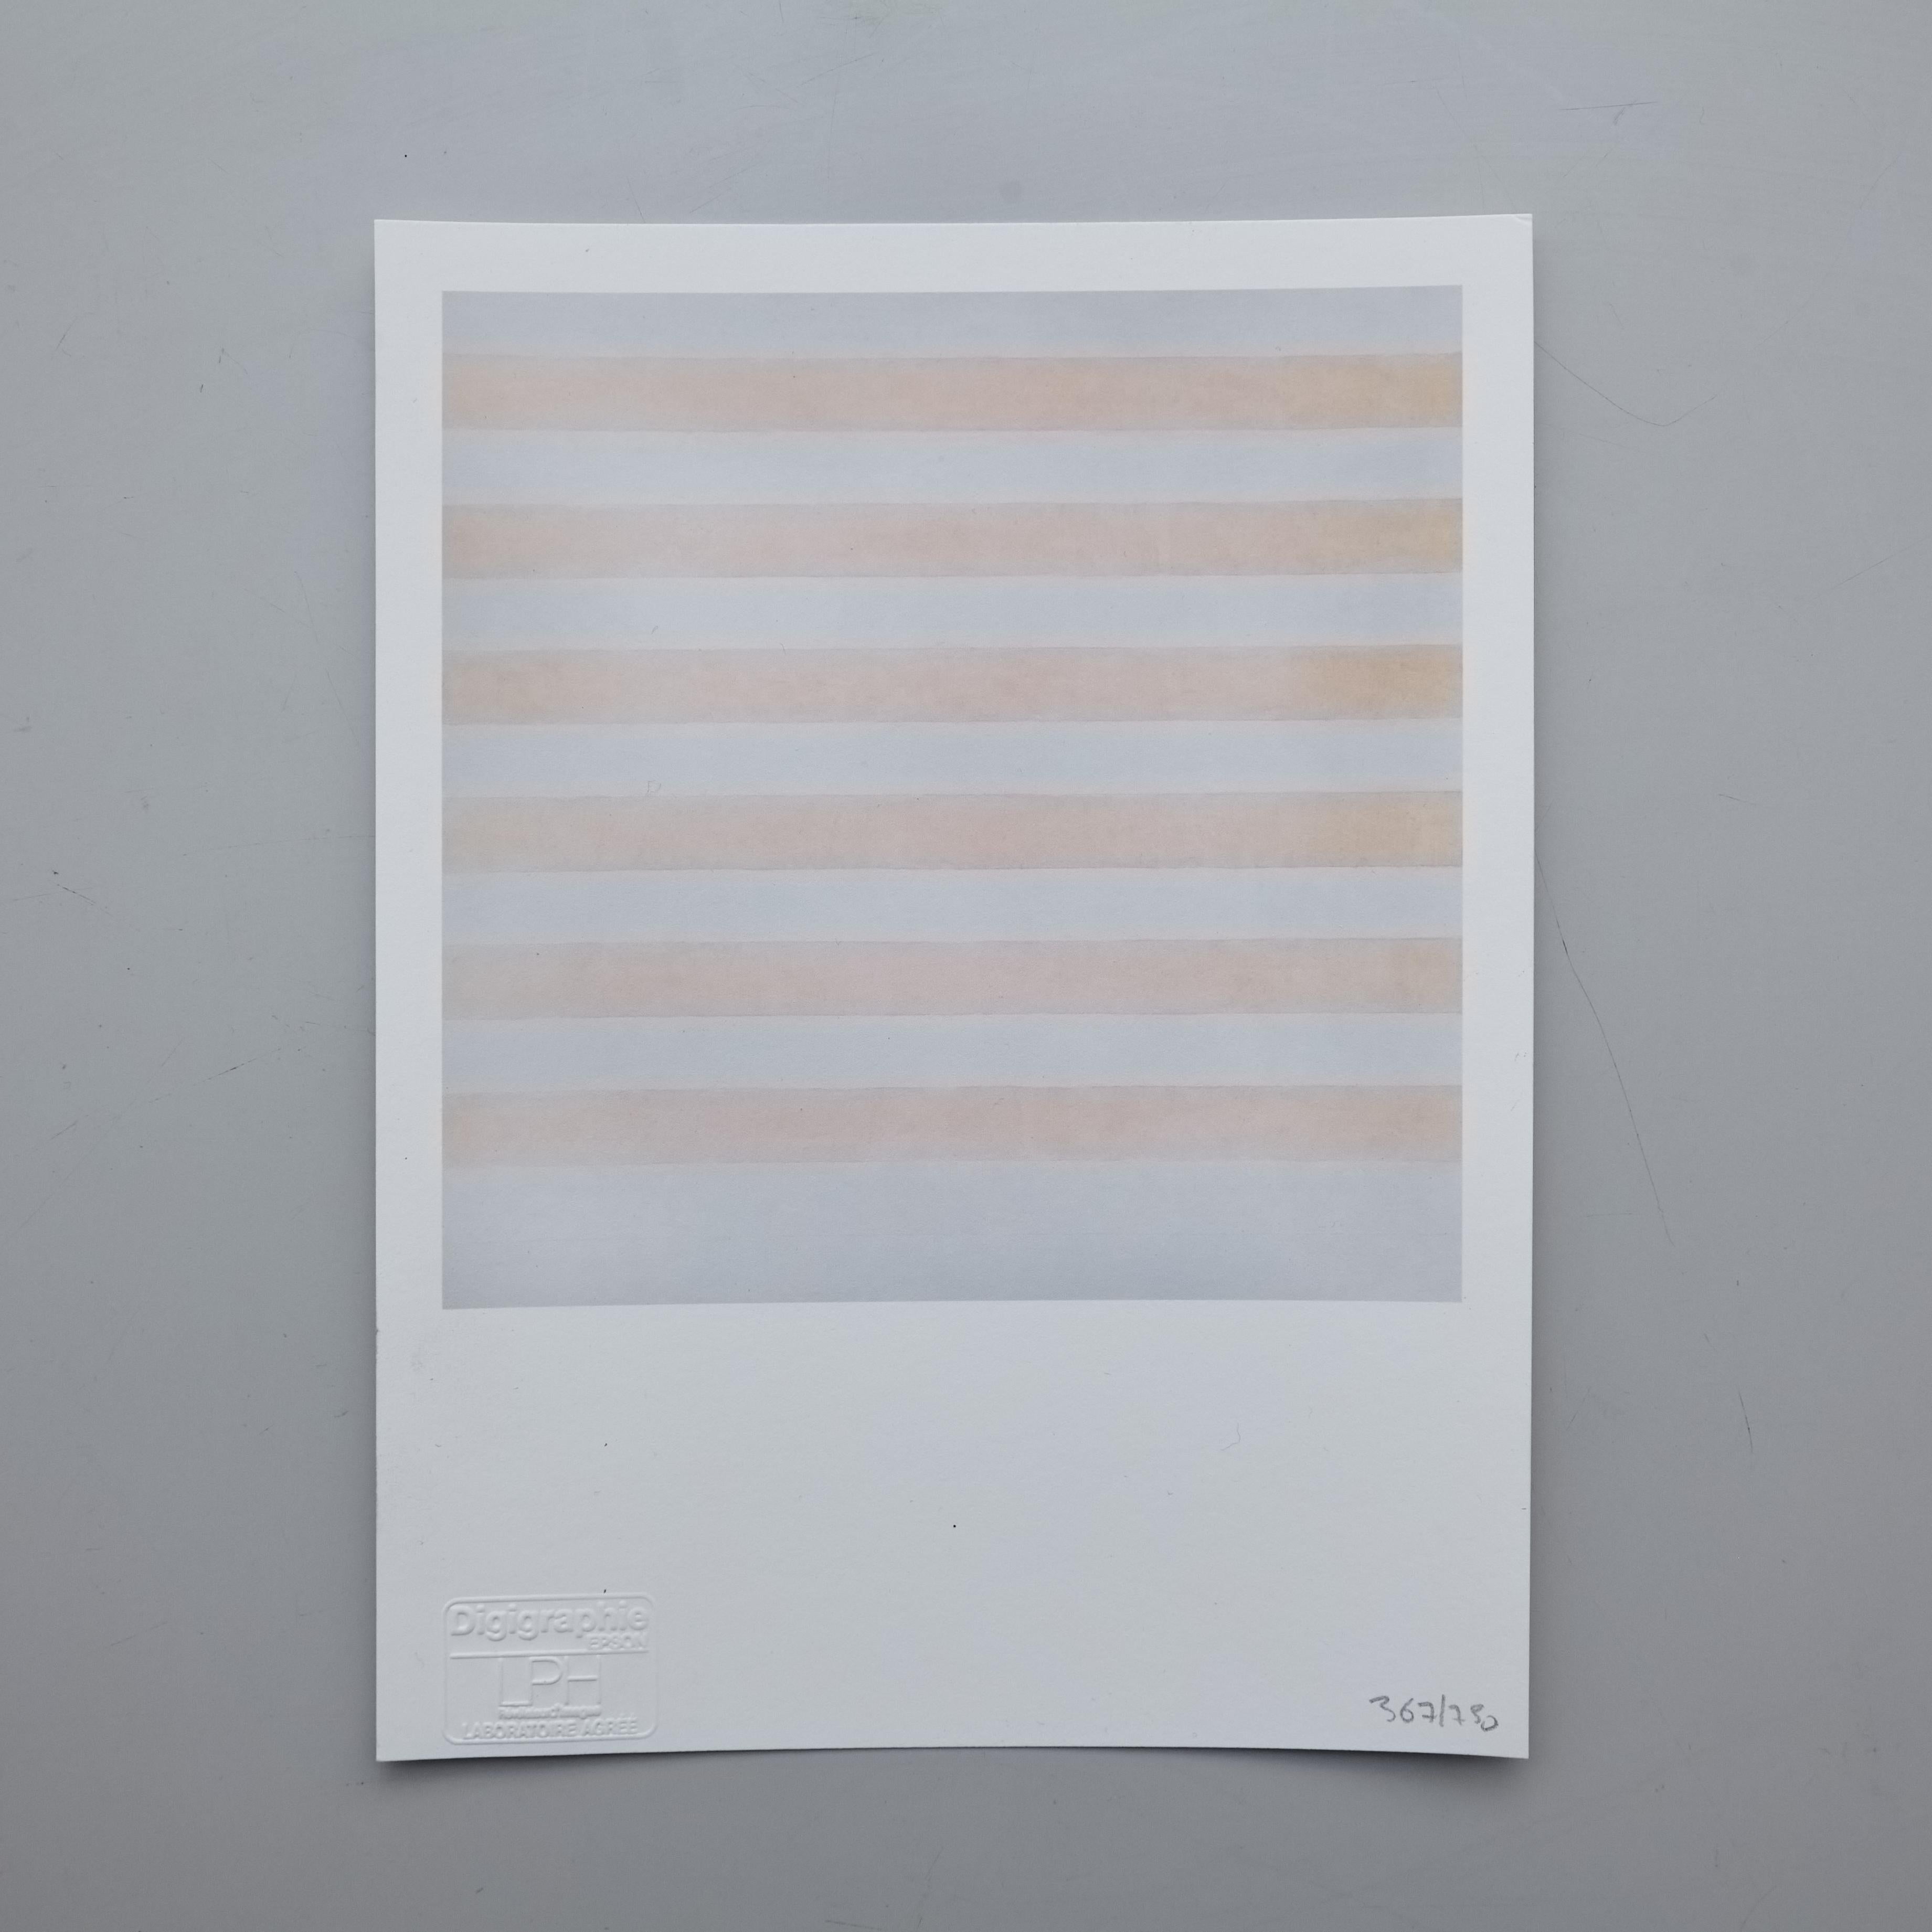 Agnes Martin 'Happy Holiday' Digigraphie Nº17 Limited Edition, in, 2015 2